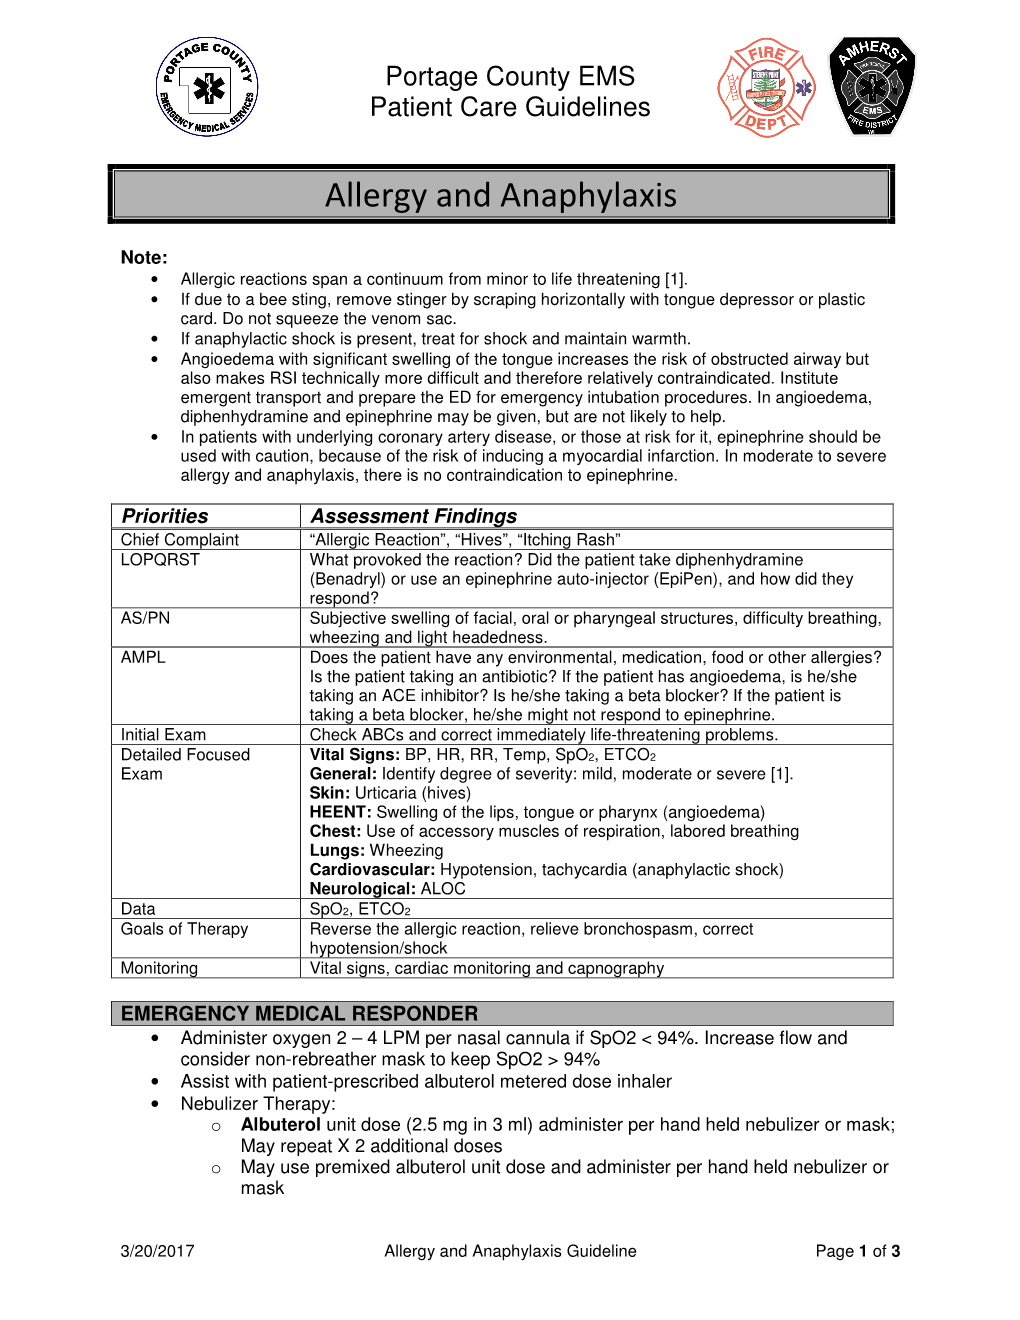 Allergy and Anaphylaxis